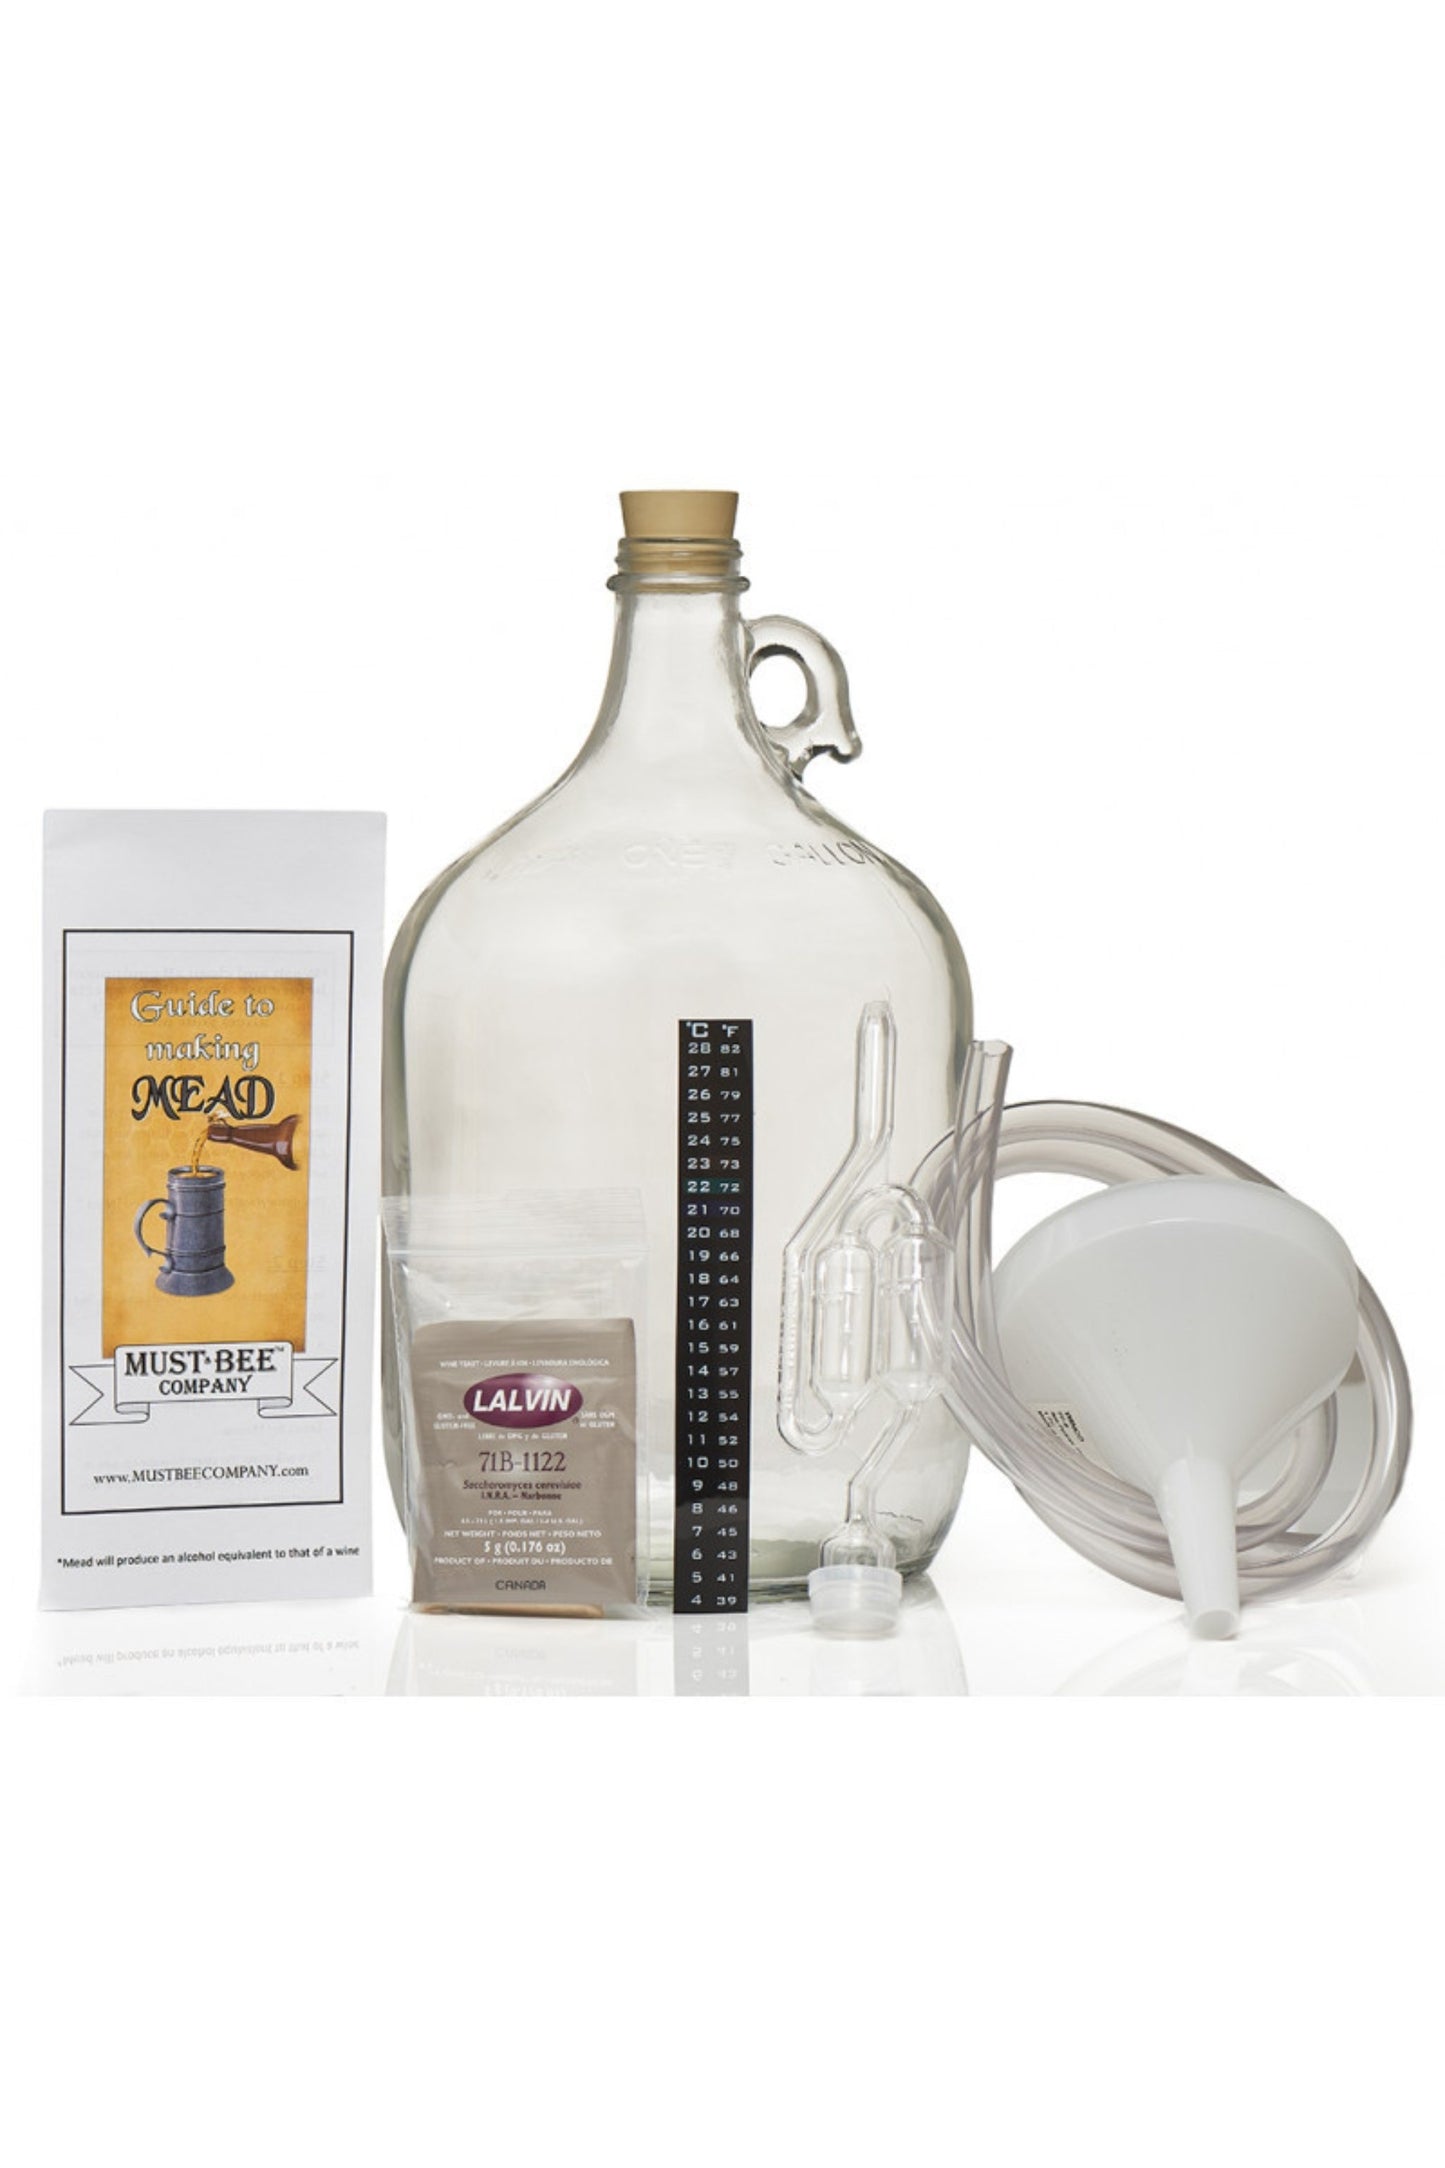 Savannah Bee Company Mead Making Kit includes a 1 gallon glass carboy, airlock and rubber stopper, syphon tube, thermometer tape, yeast, yeast nutrients, funnel and step-by-step instructions.